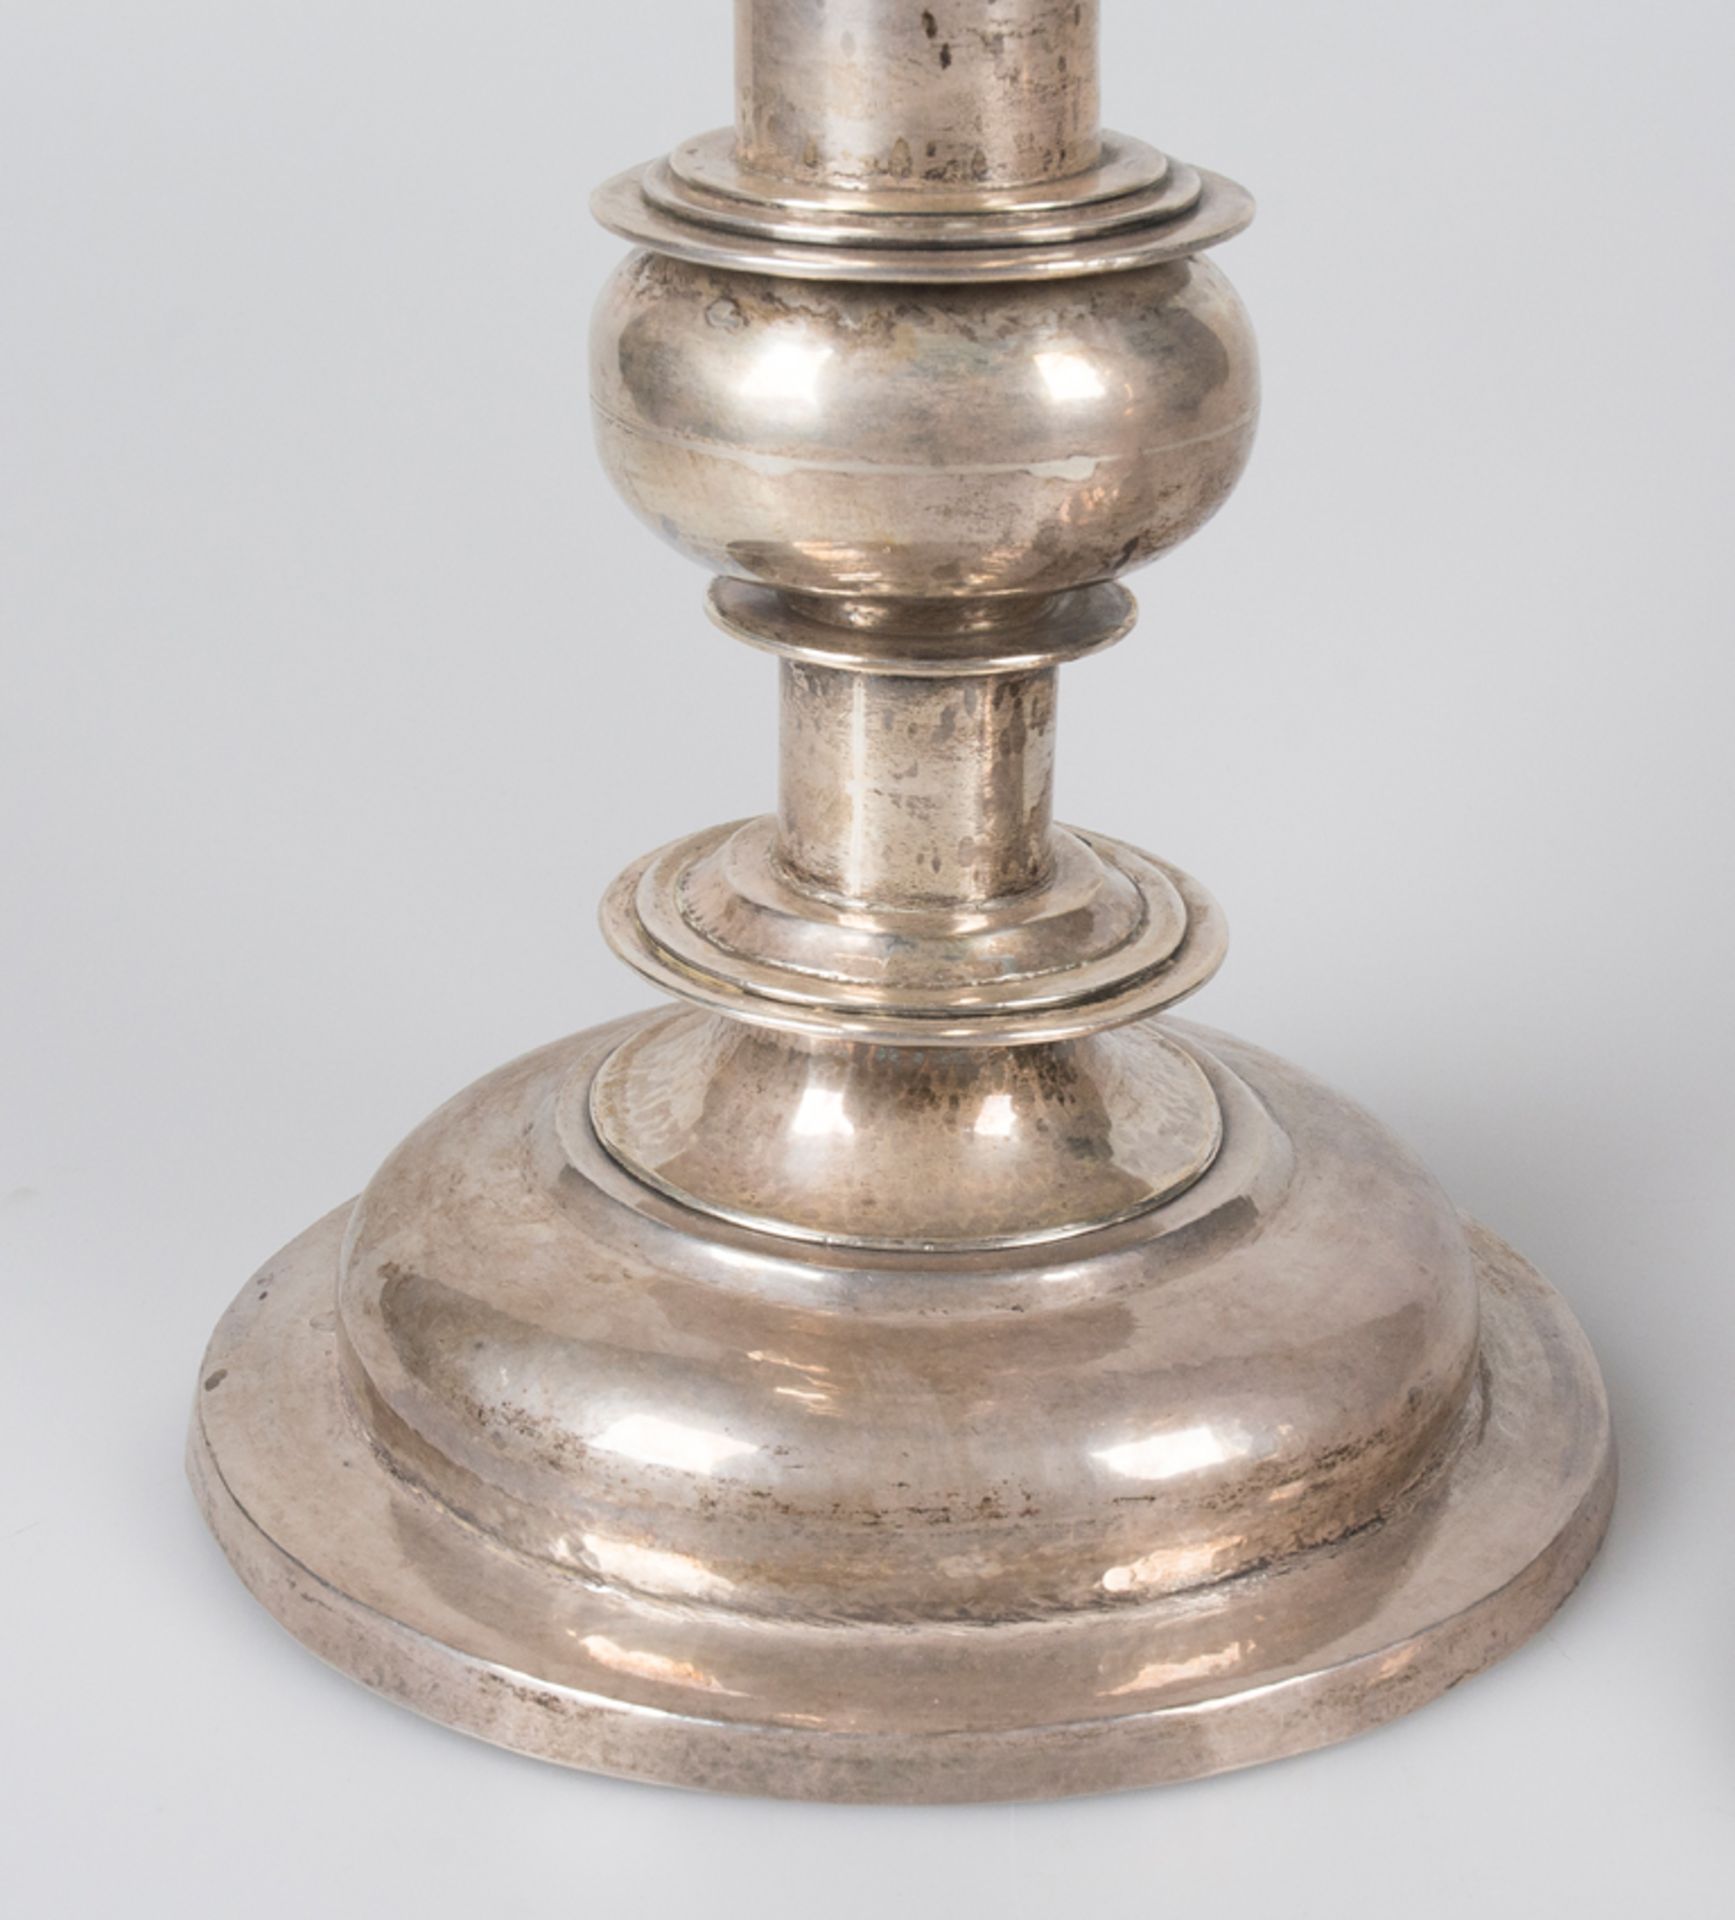 Pair of large silver candlesticks. 17th - 18th century. - Image 3 of 5